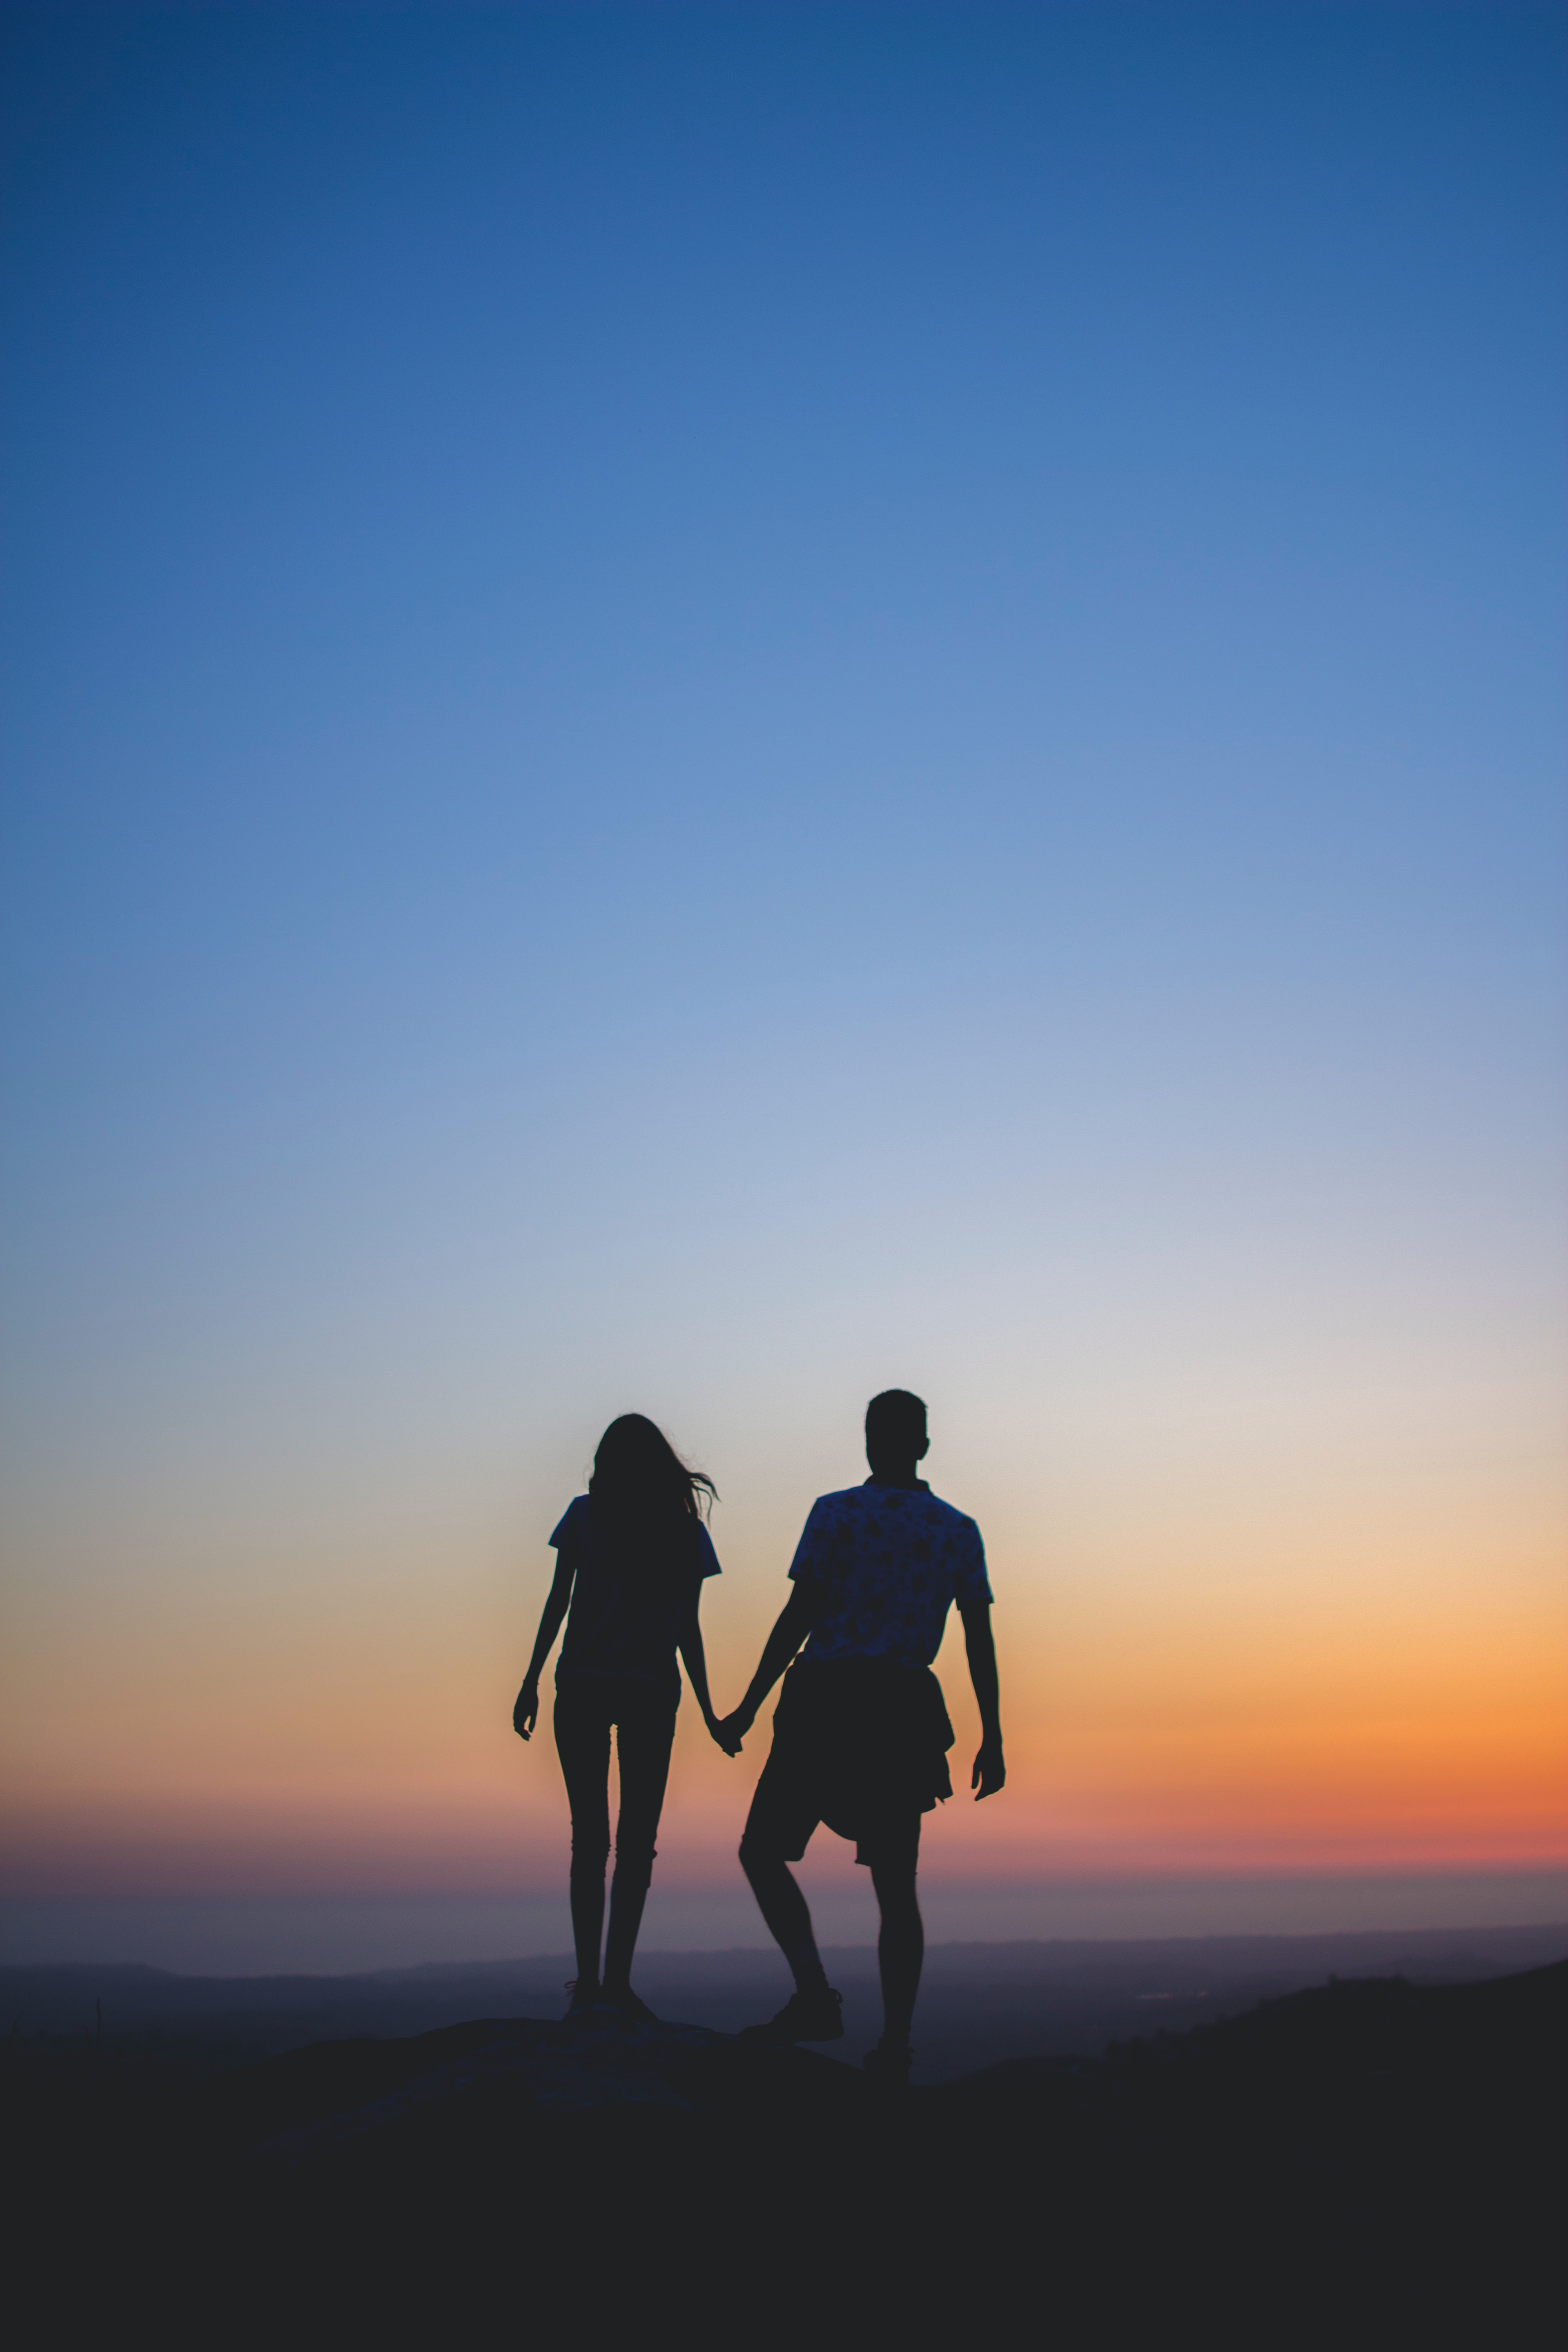 A photo of a couple holding hands in silhouette photography | Source: Unsplash